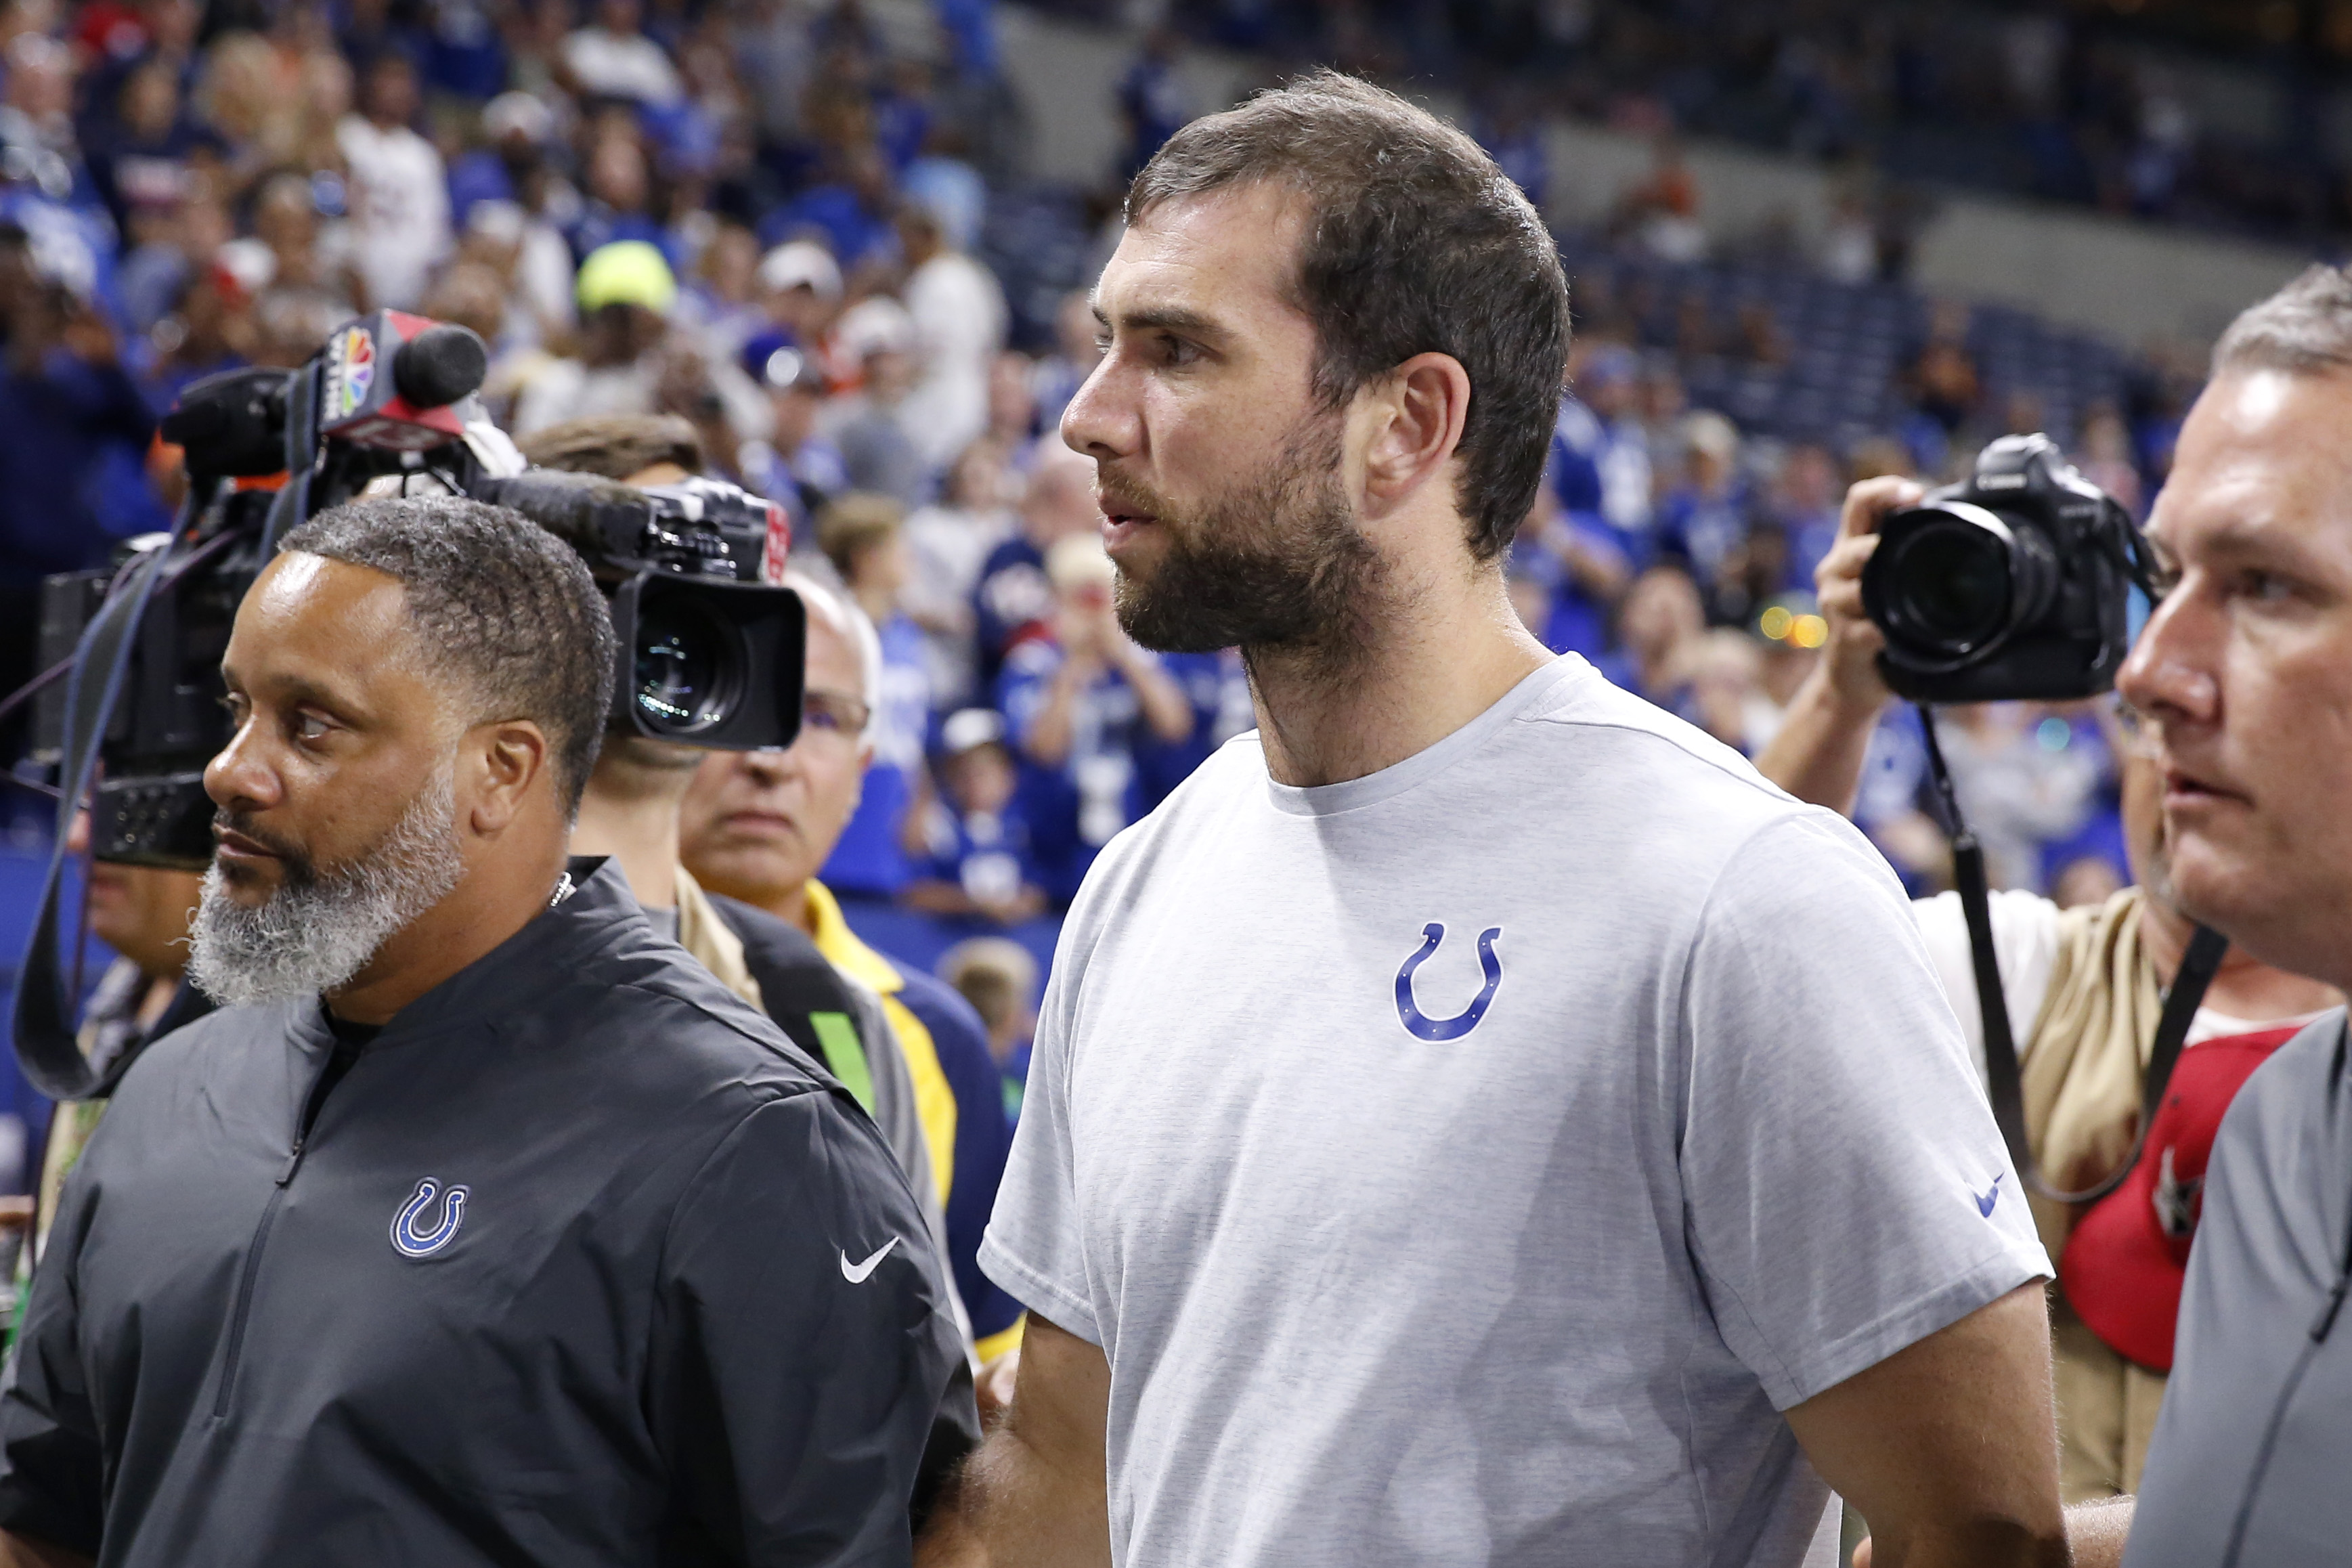 Former Colts quarterback Andrew Luck walks off the field after it was reported he would be retiring from the NFL